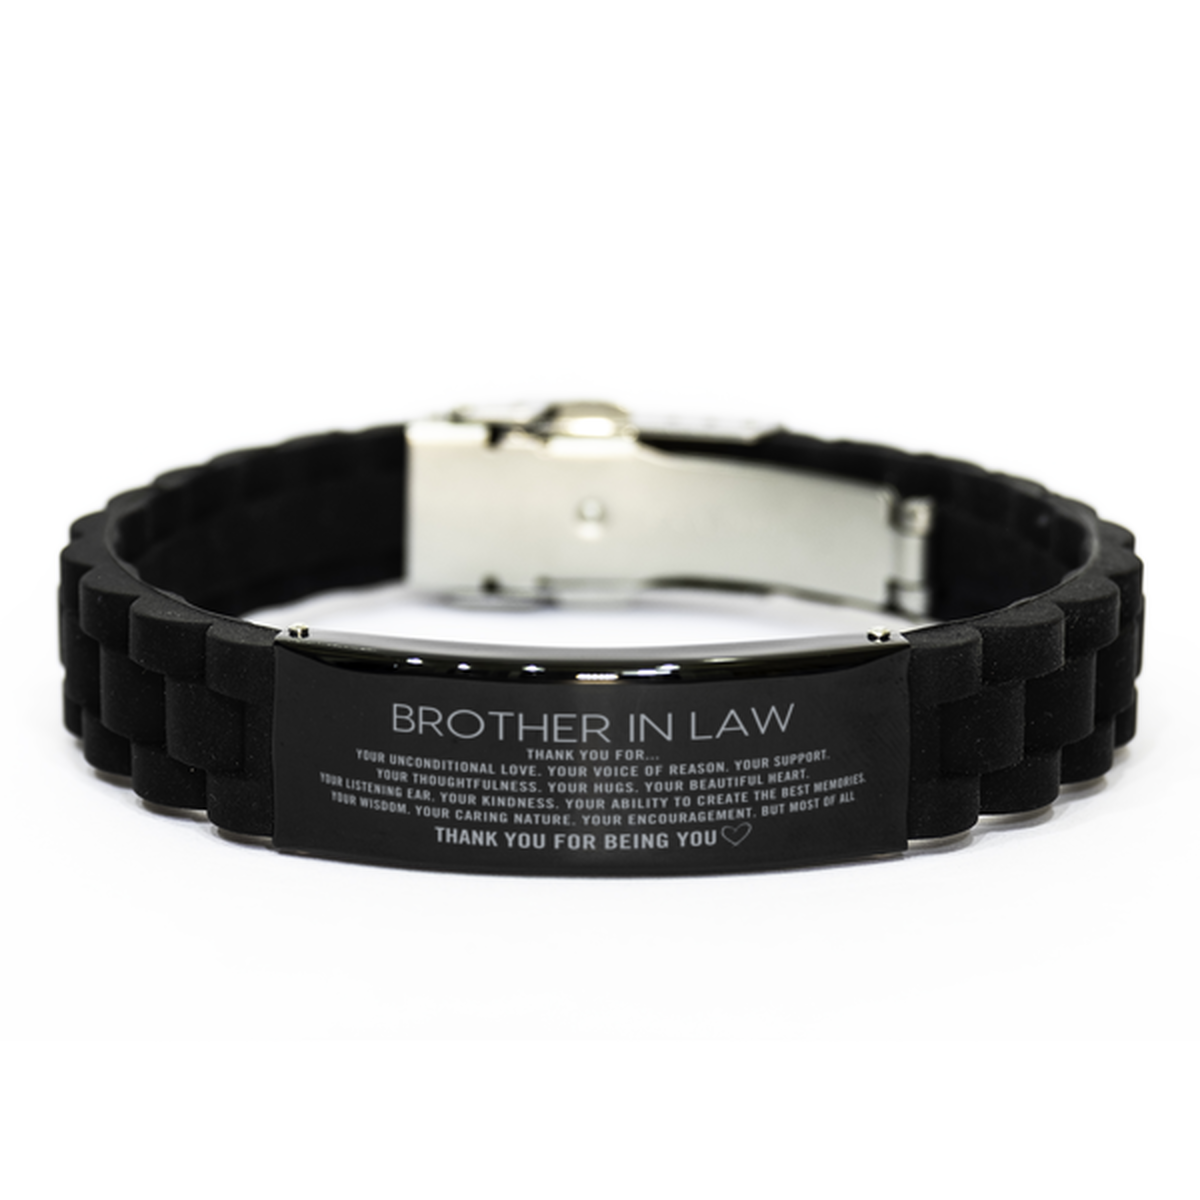 Brother In Law Black Glidelock Clasp Bracelet Custom, Engraved Gifts For Brother In Law Christmas Graduation Birthday Gifts for Men Women Brother In Law Thank you for Your unconditional love